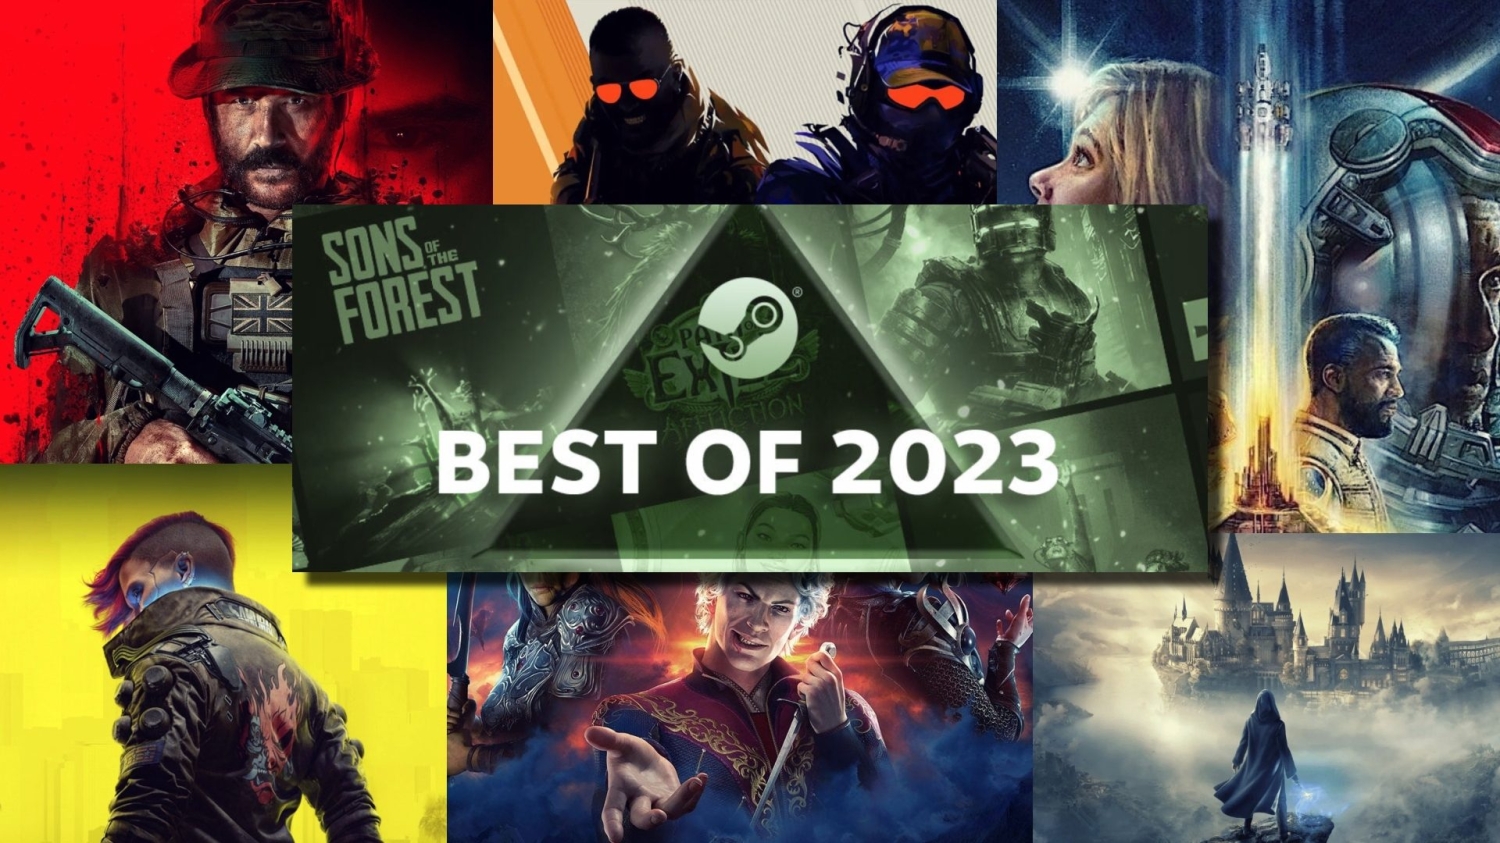 Steam's Best of 2023 covers the best sellers, most played, and more